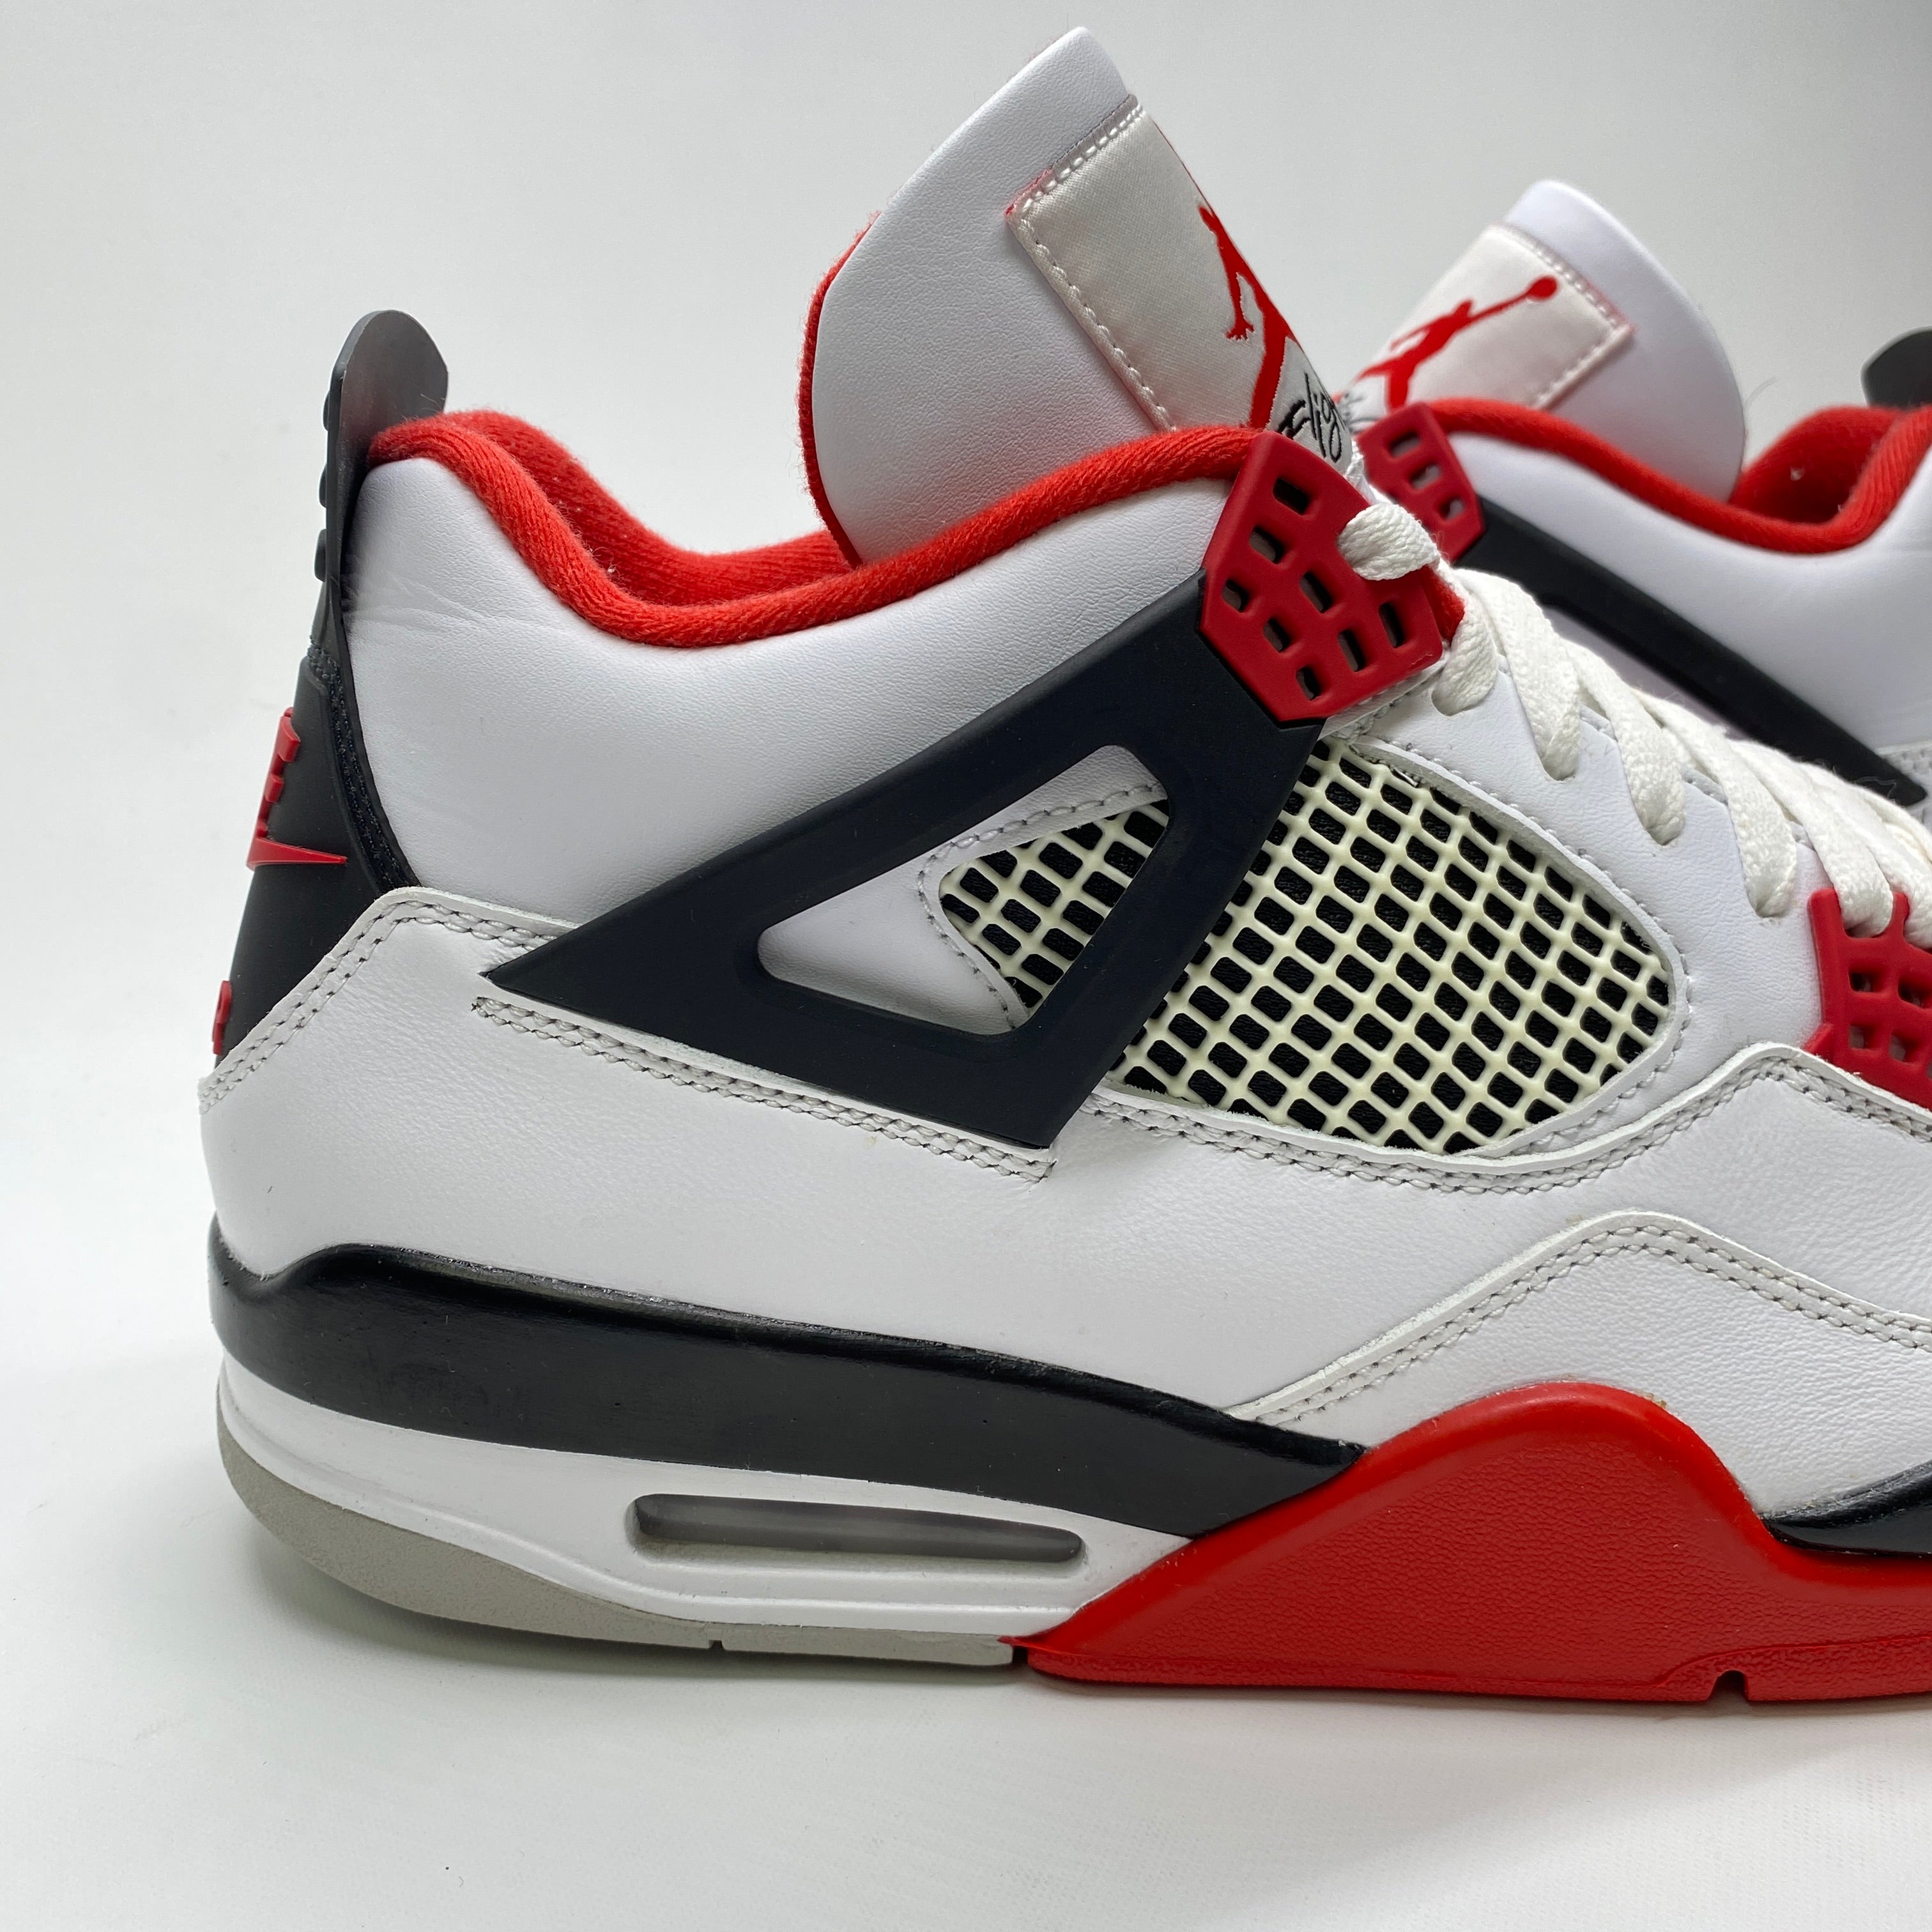 Air Jordan 4 Retro &quot;Fire Red&quot; 2020 Used Size 12